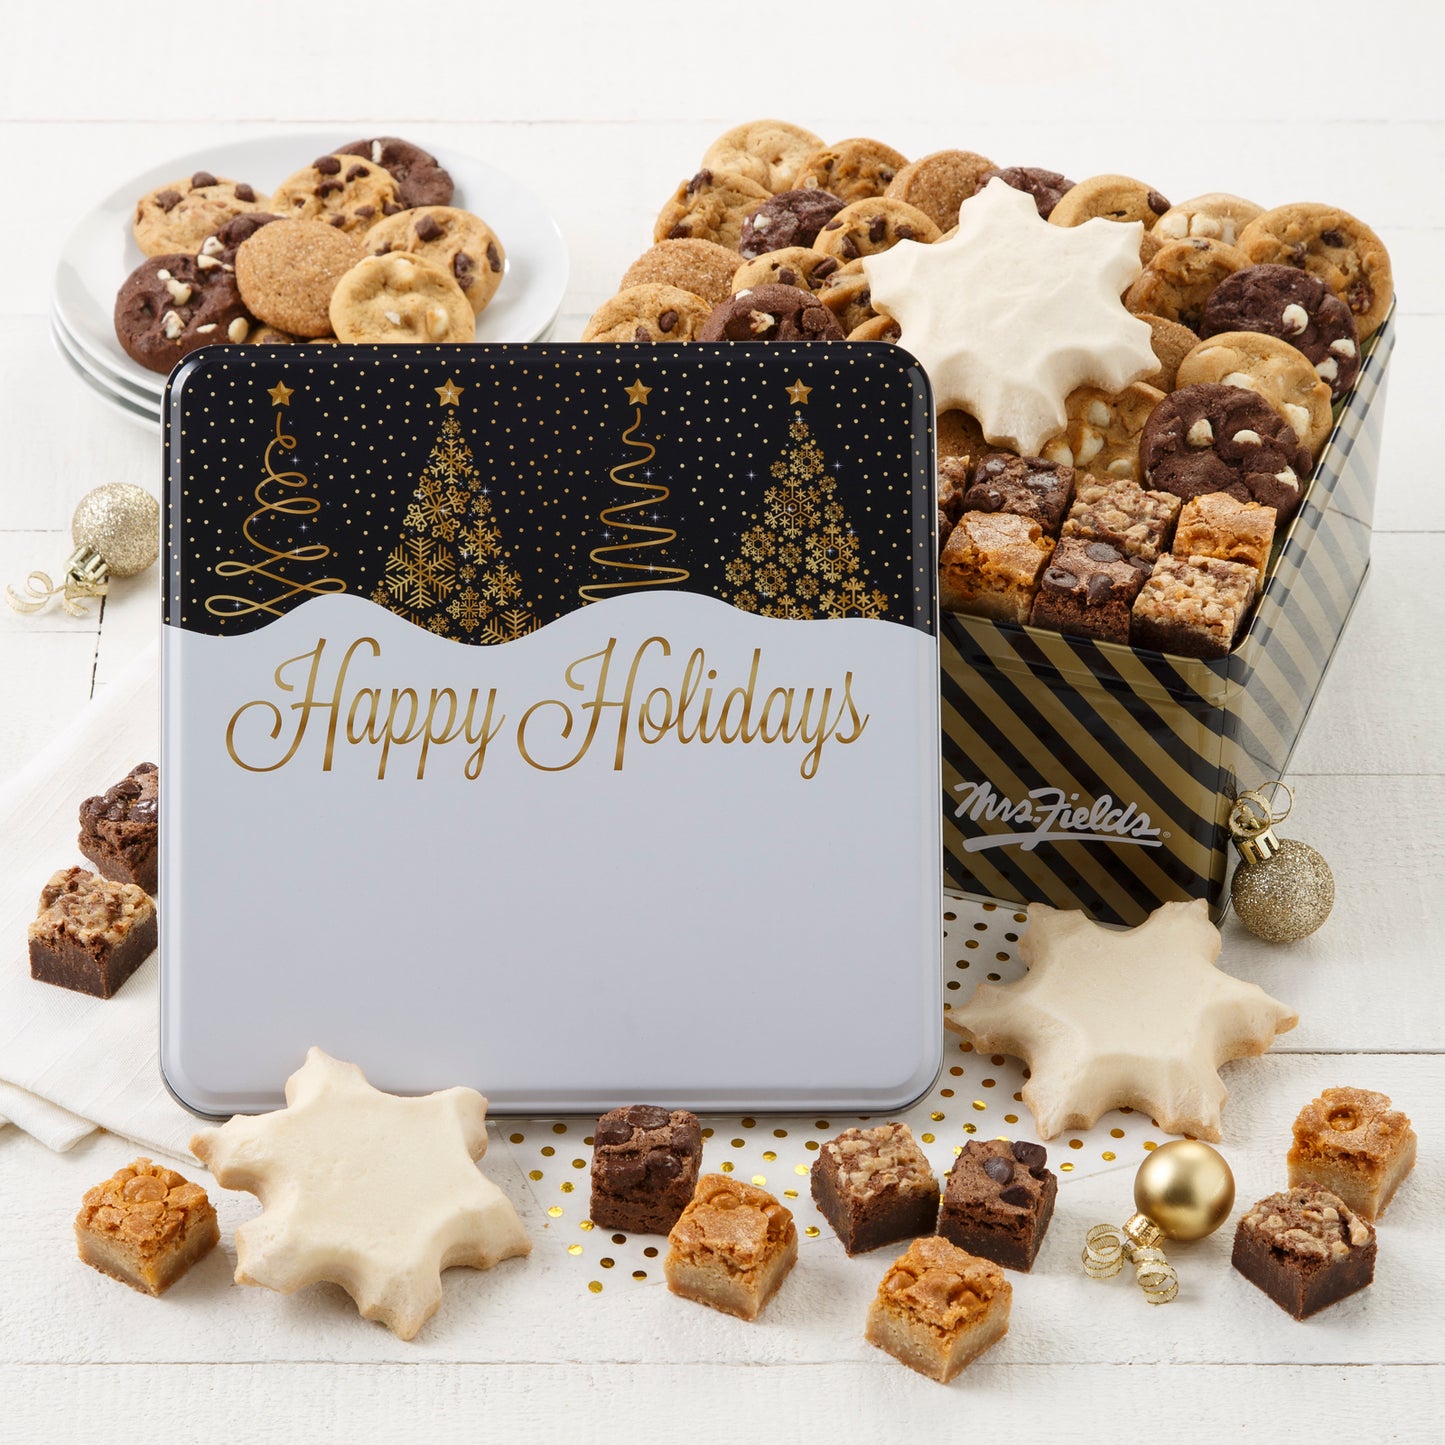 A Happy Holidays black and gold tin decorated with Christmas trees and filled with an assortment of Nibblers®, brown bites, and three frosted snowflakes.